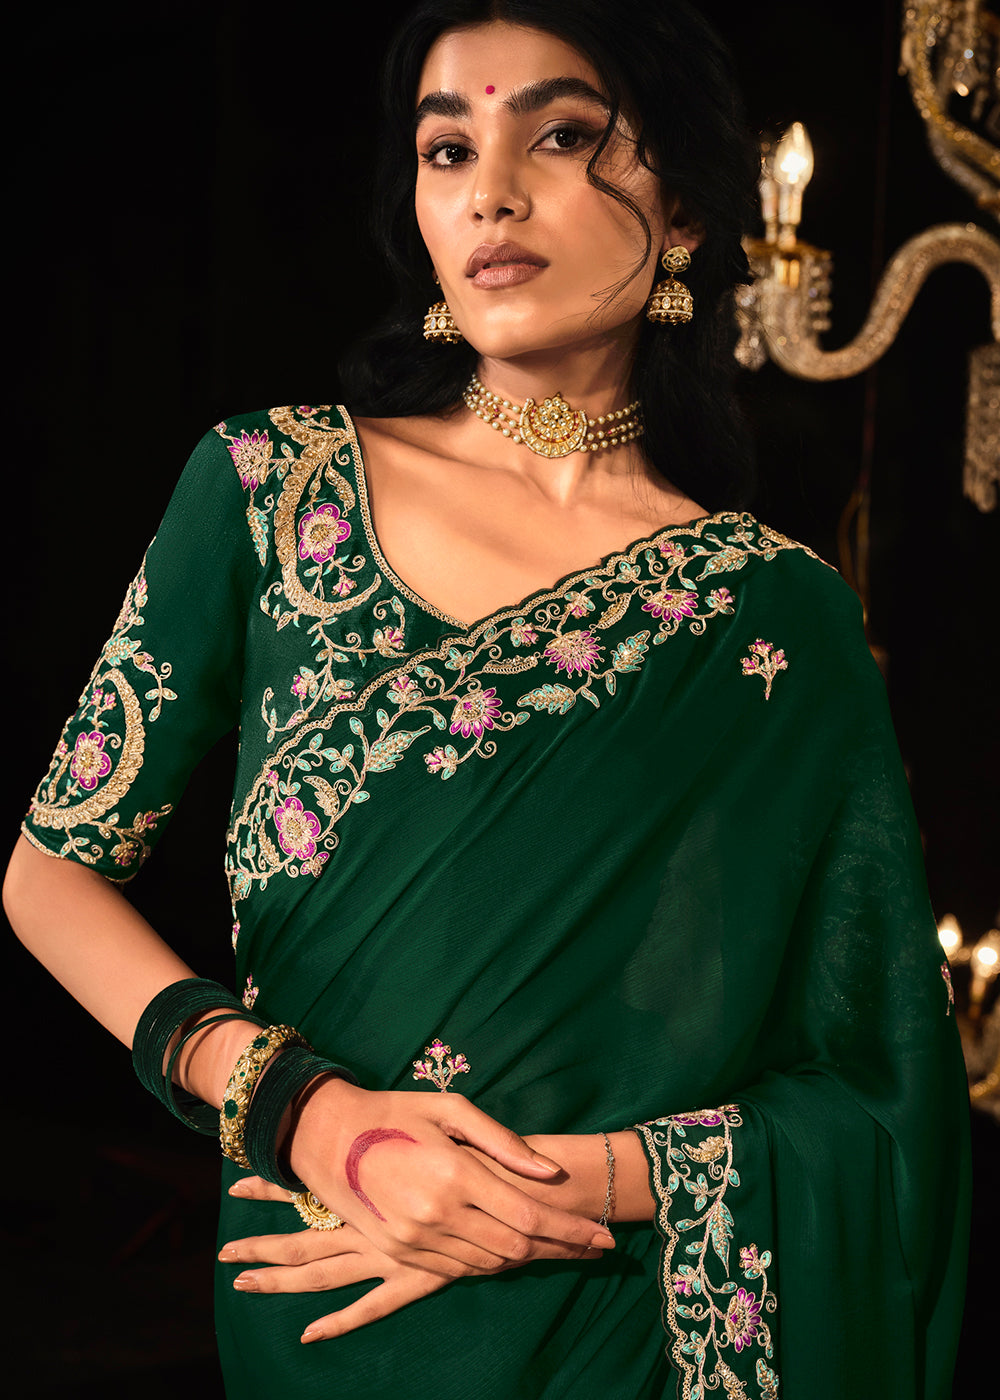 Buy Now Fancy Bottle Green Embroidered Designer Wedding Wear Saree Online in USA, UK, Canada & Worldwide at Empress Clothing. 